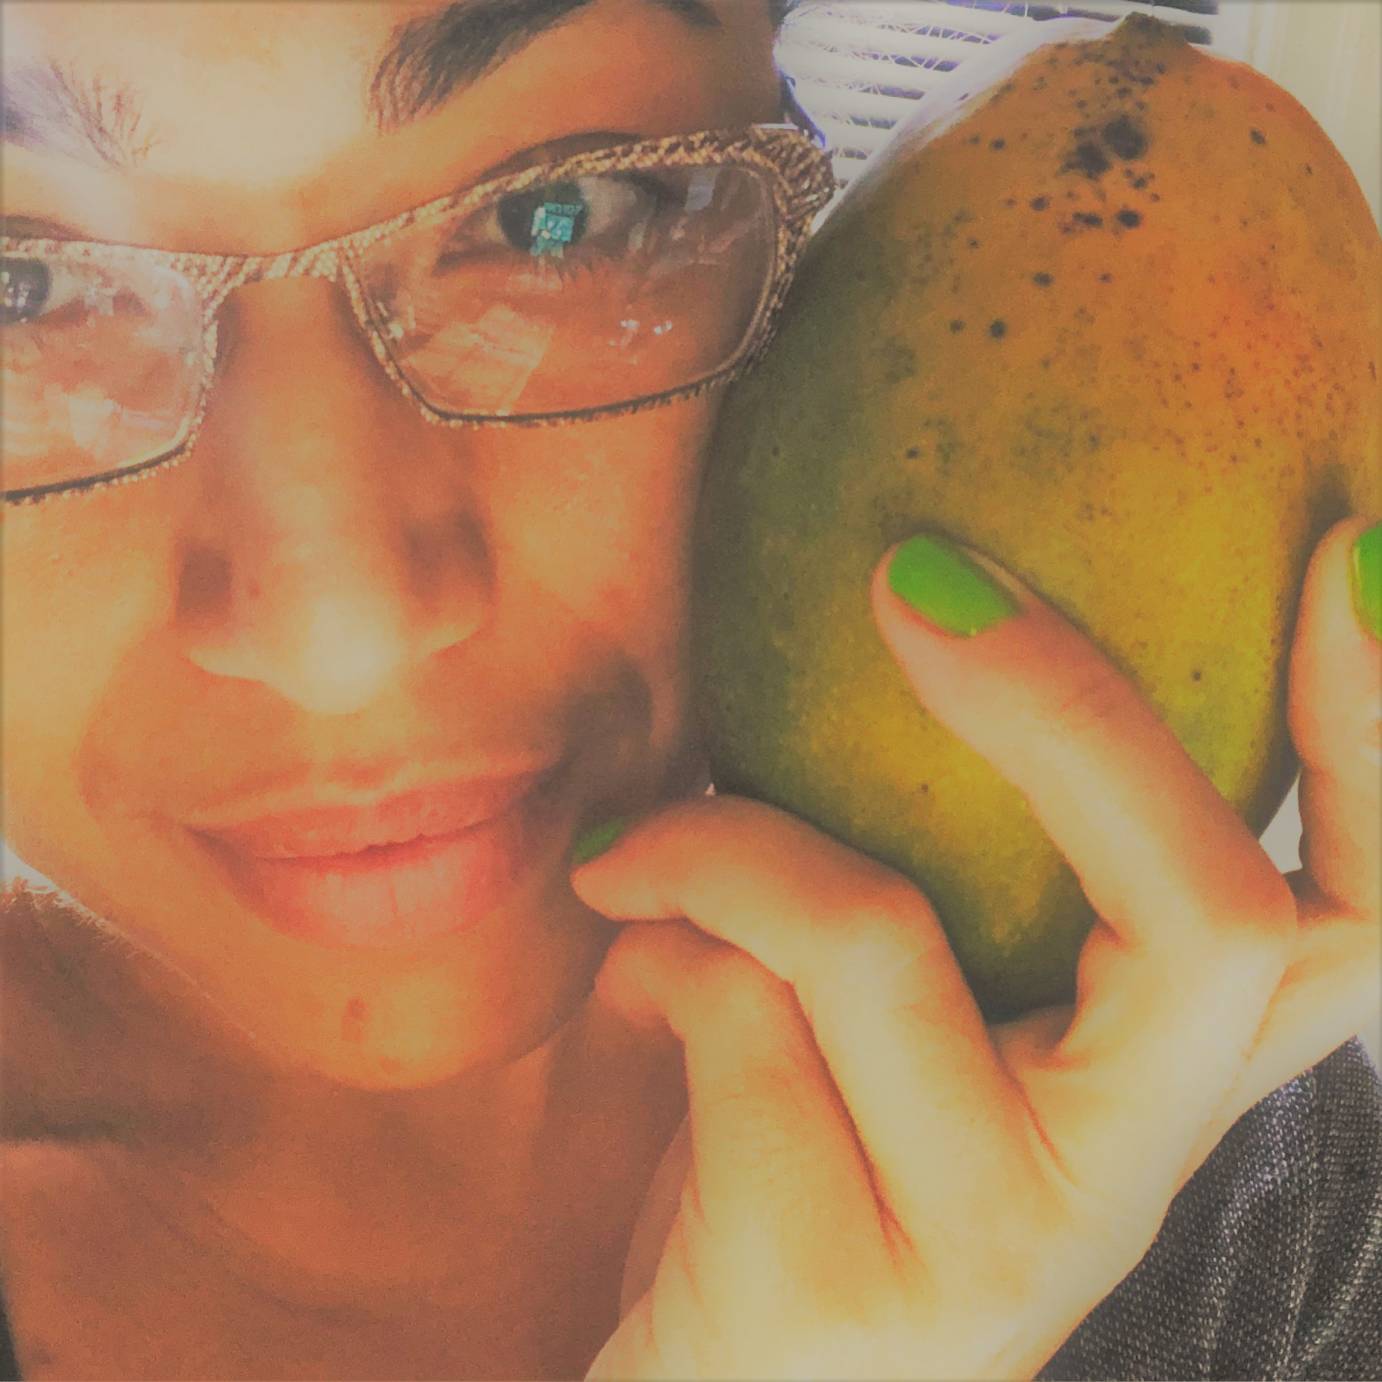 A close up of a Black woman's facing, wearing animal-print-like glasses holding with bright green lacquered fingers an overripe mango against her left cheek